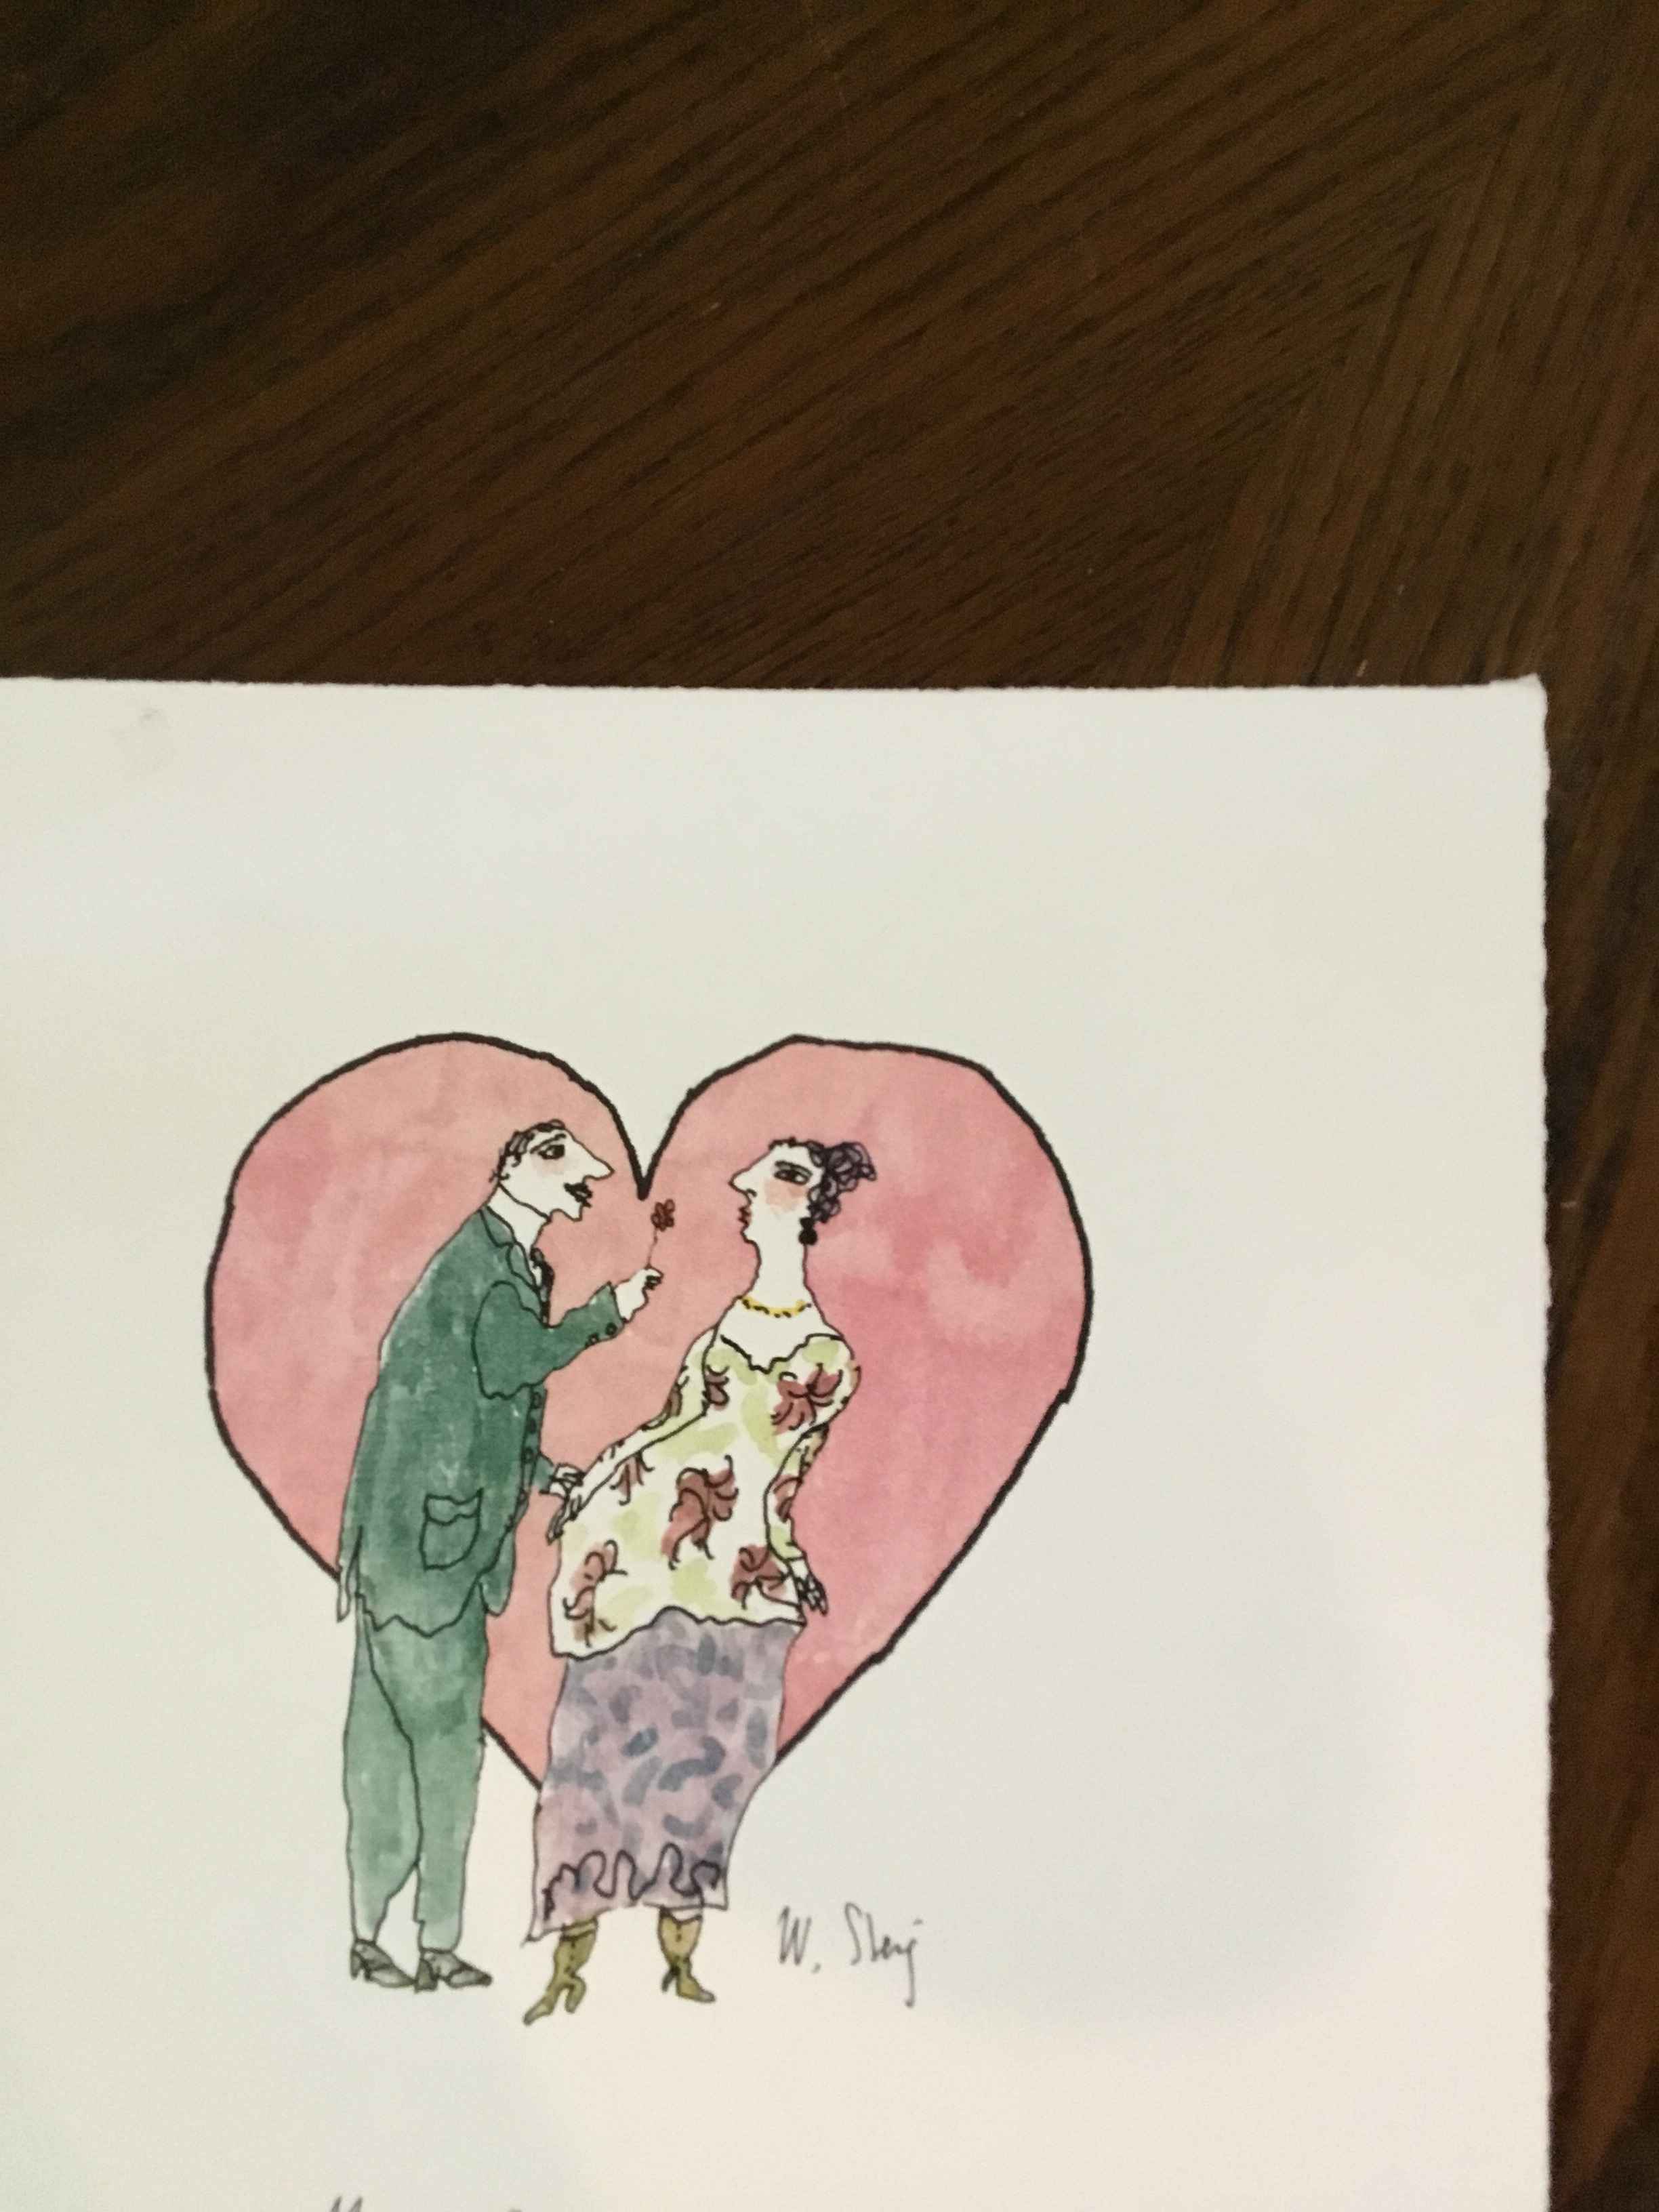 Made For Each Other by  William Steig - Masterpiece Online